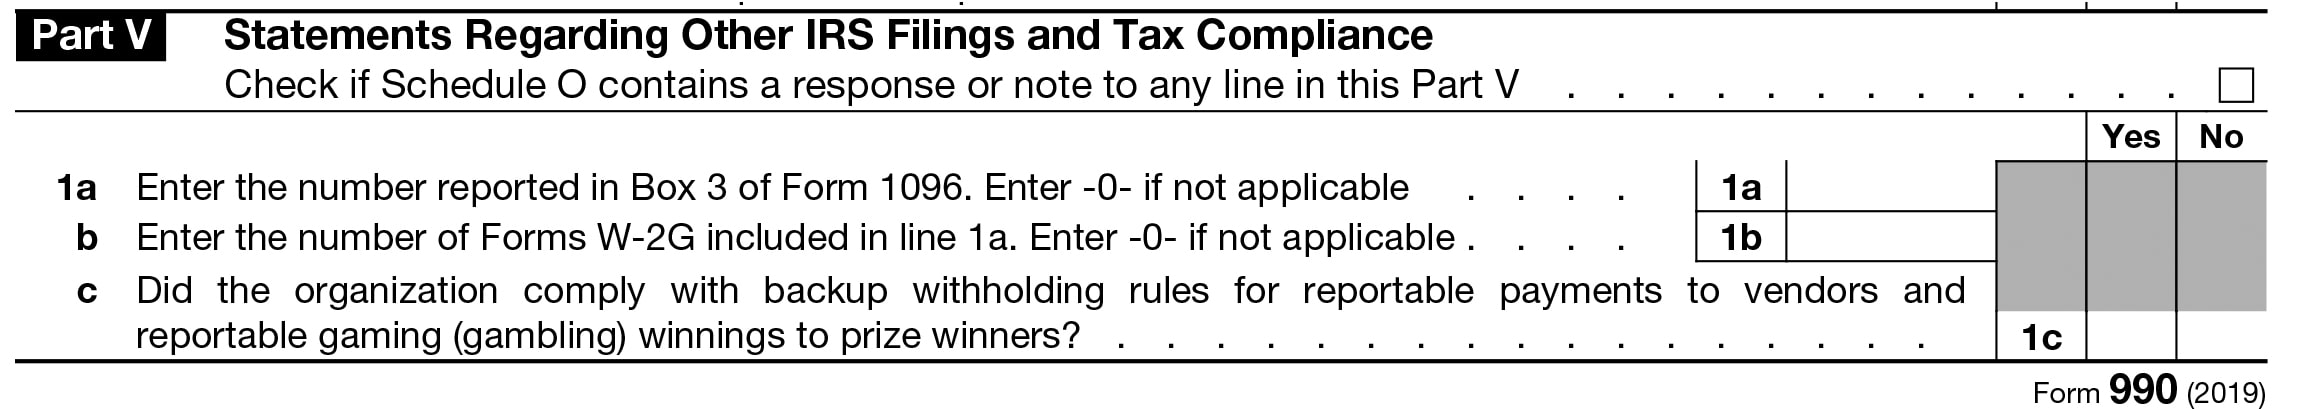 Instructions to complete Form 990 Part V - Statements Regarding Other IRS Filings and Tax Compliance